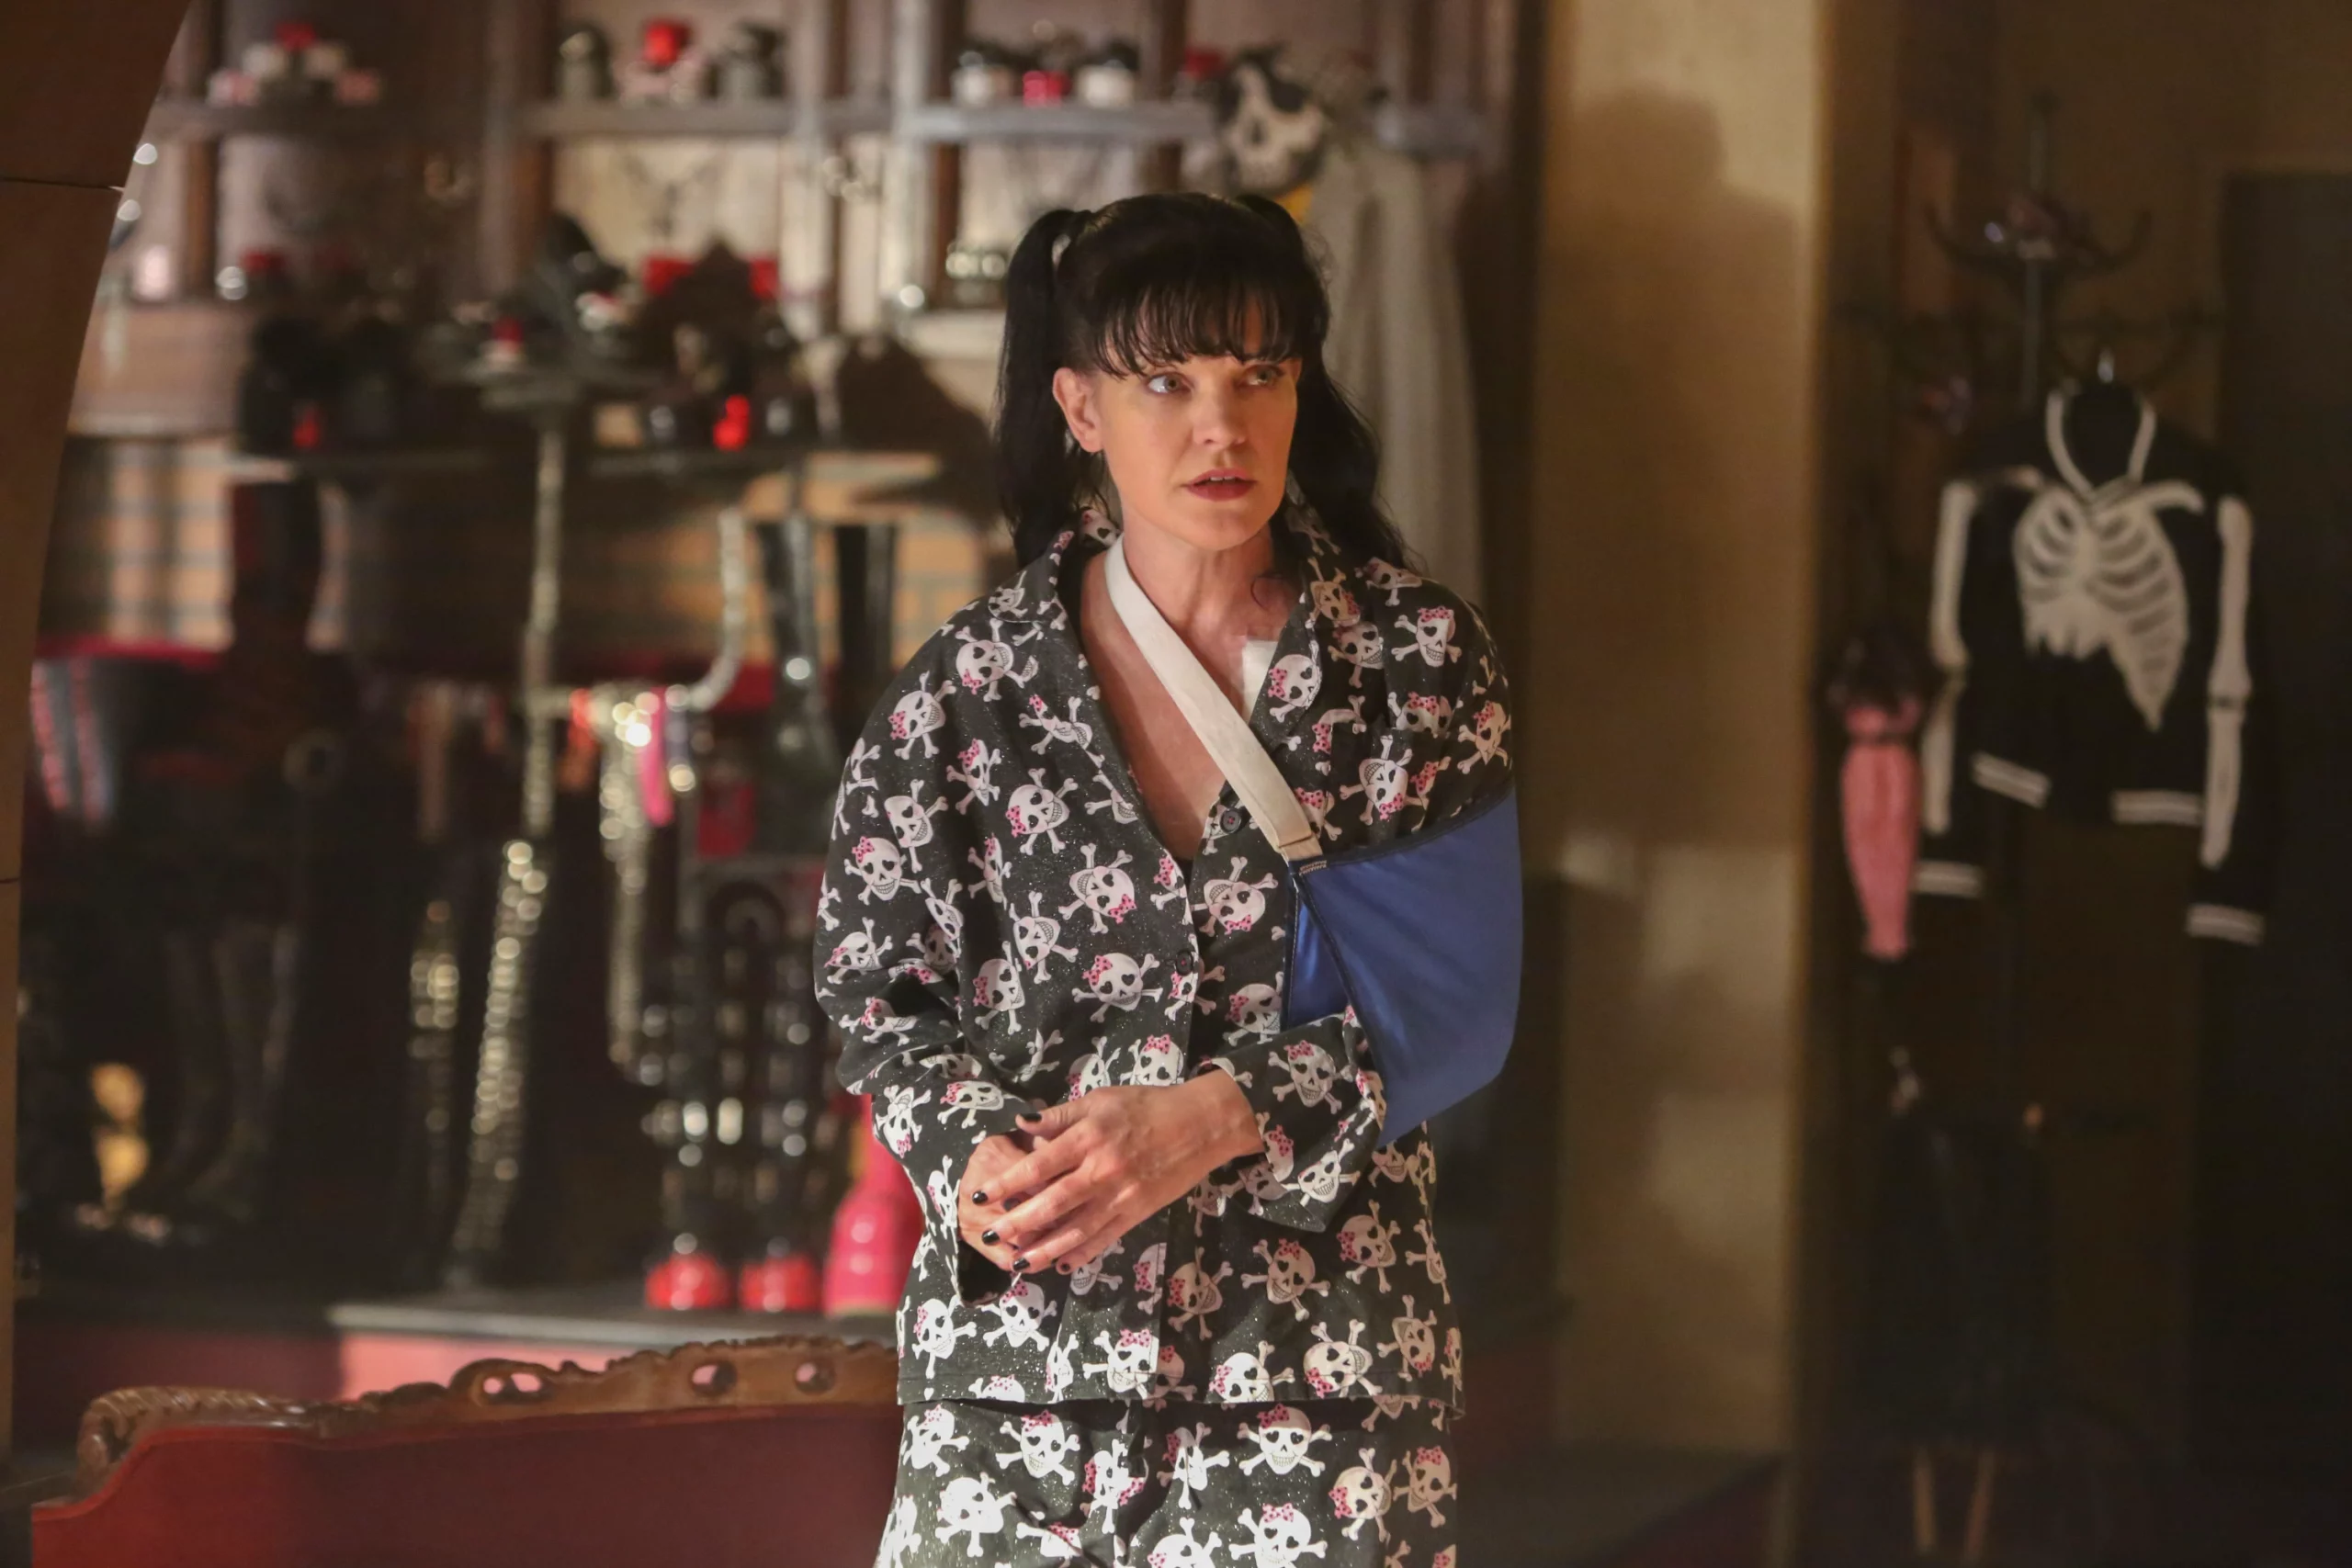 Why Did Pauley Perrette Leave NCIS?